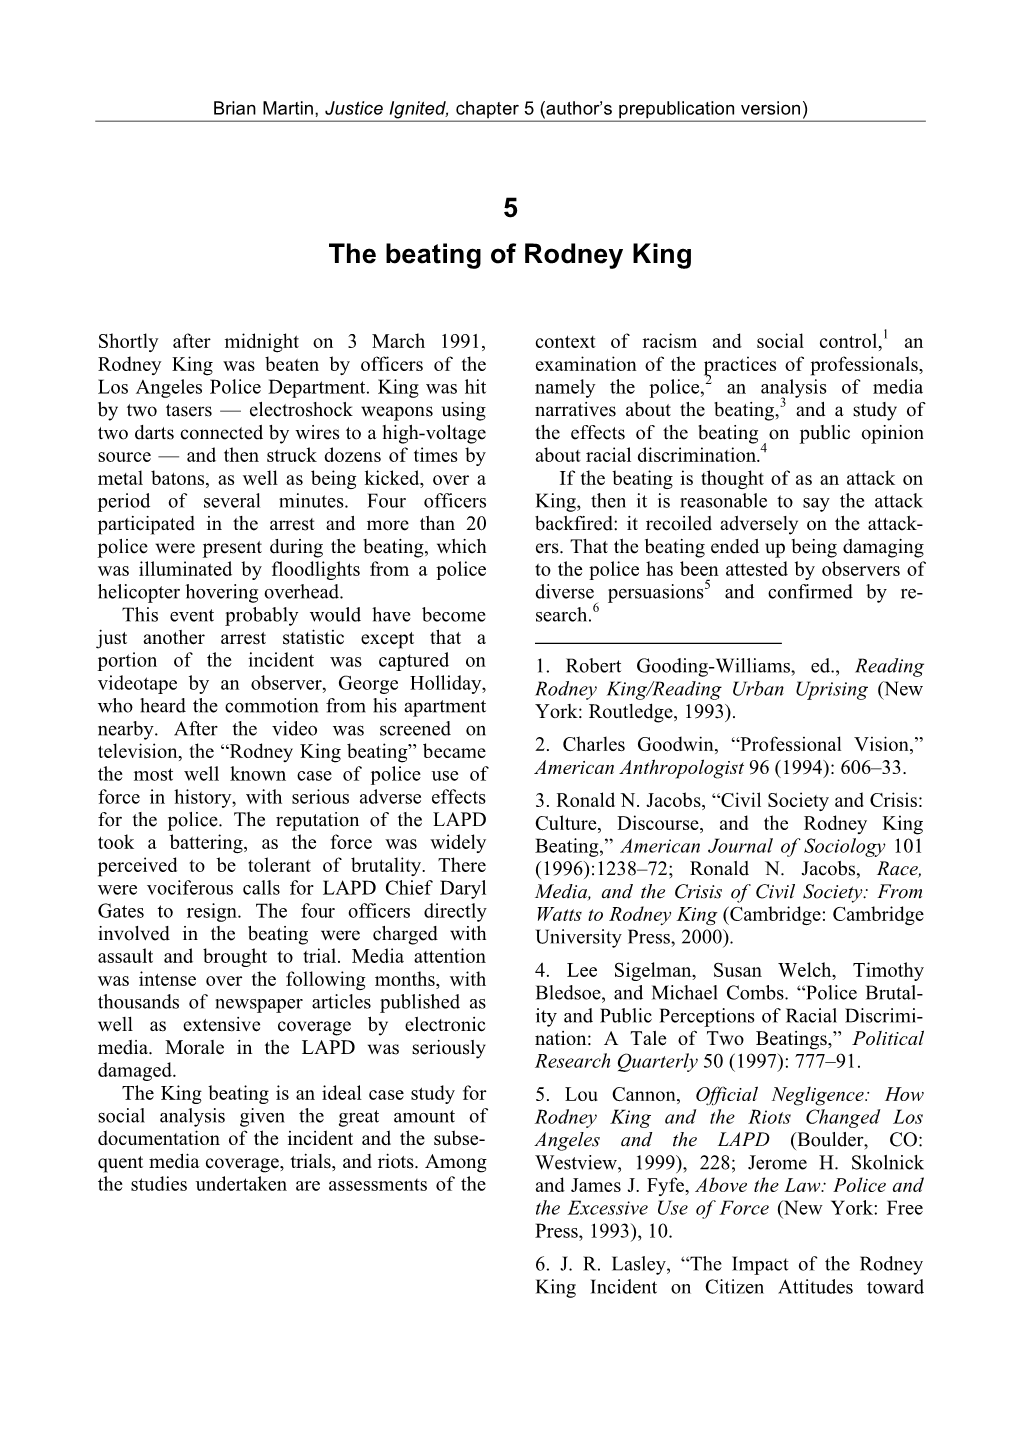 The Beating of Rodney King